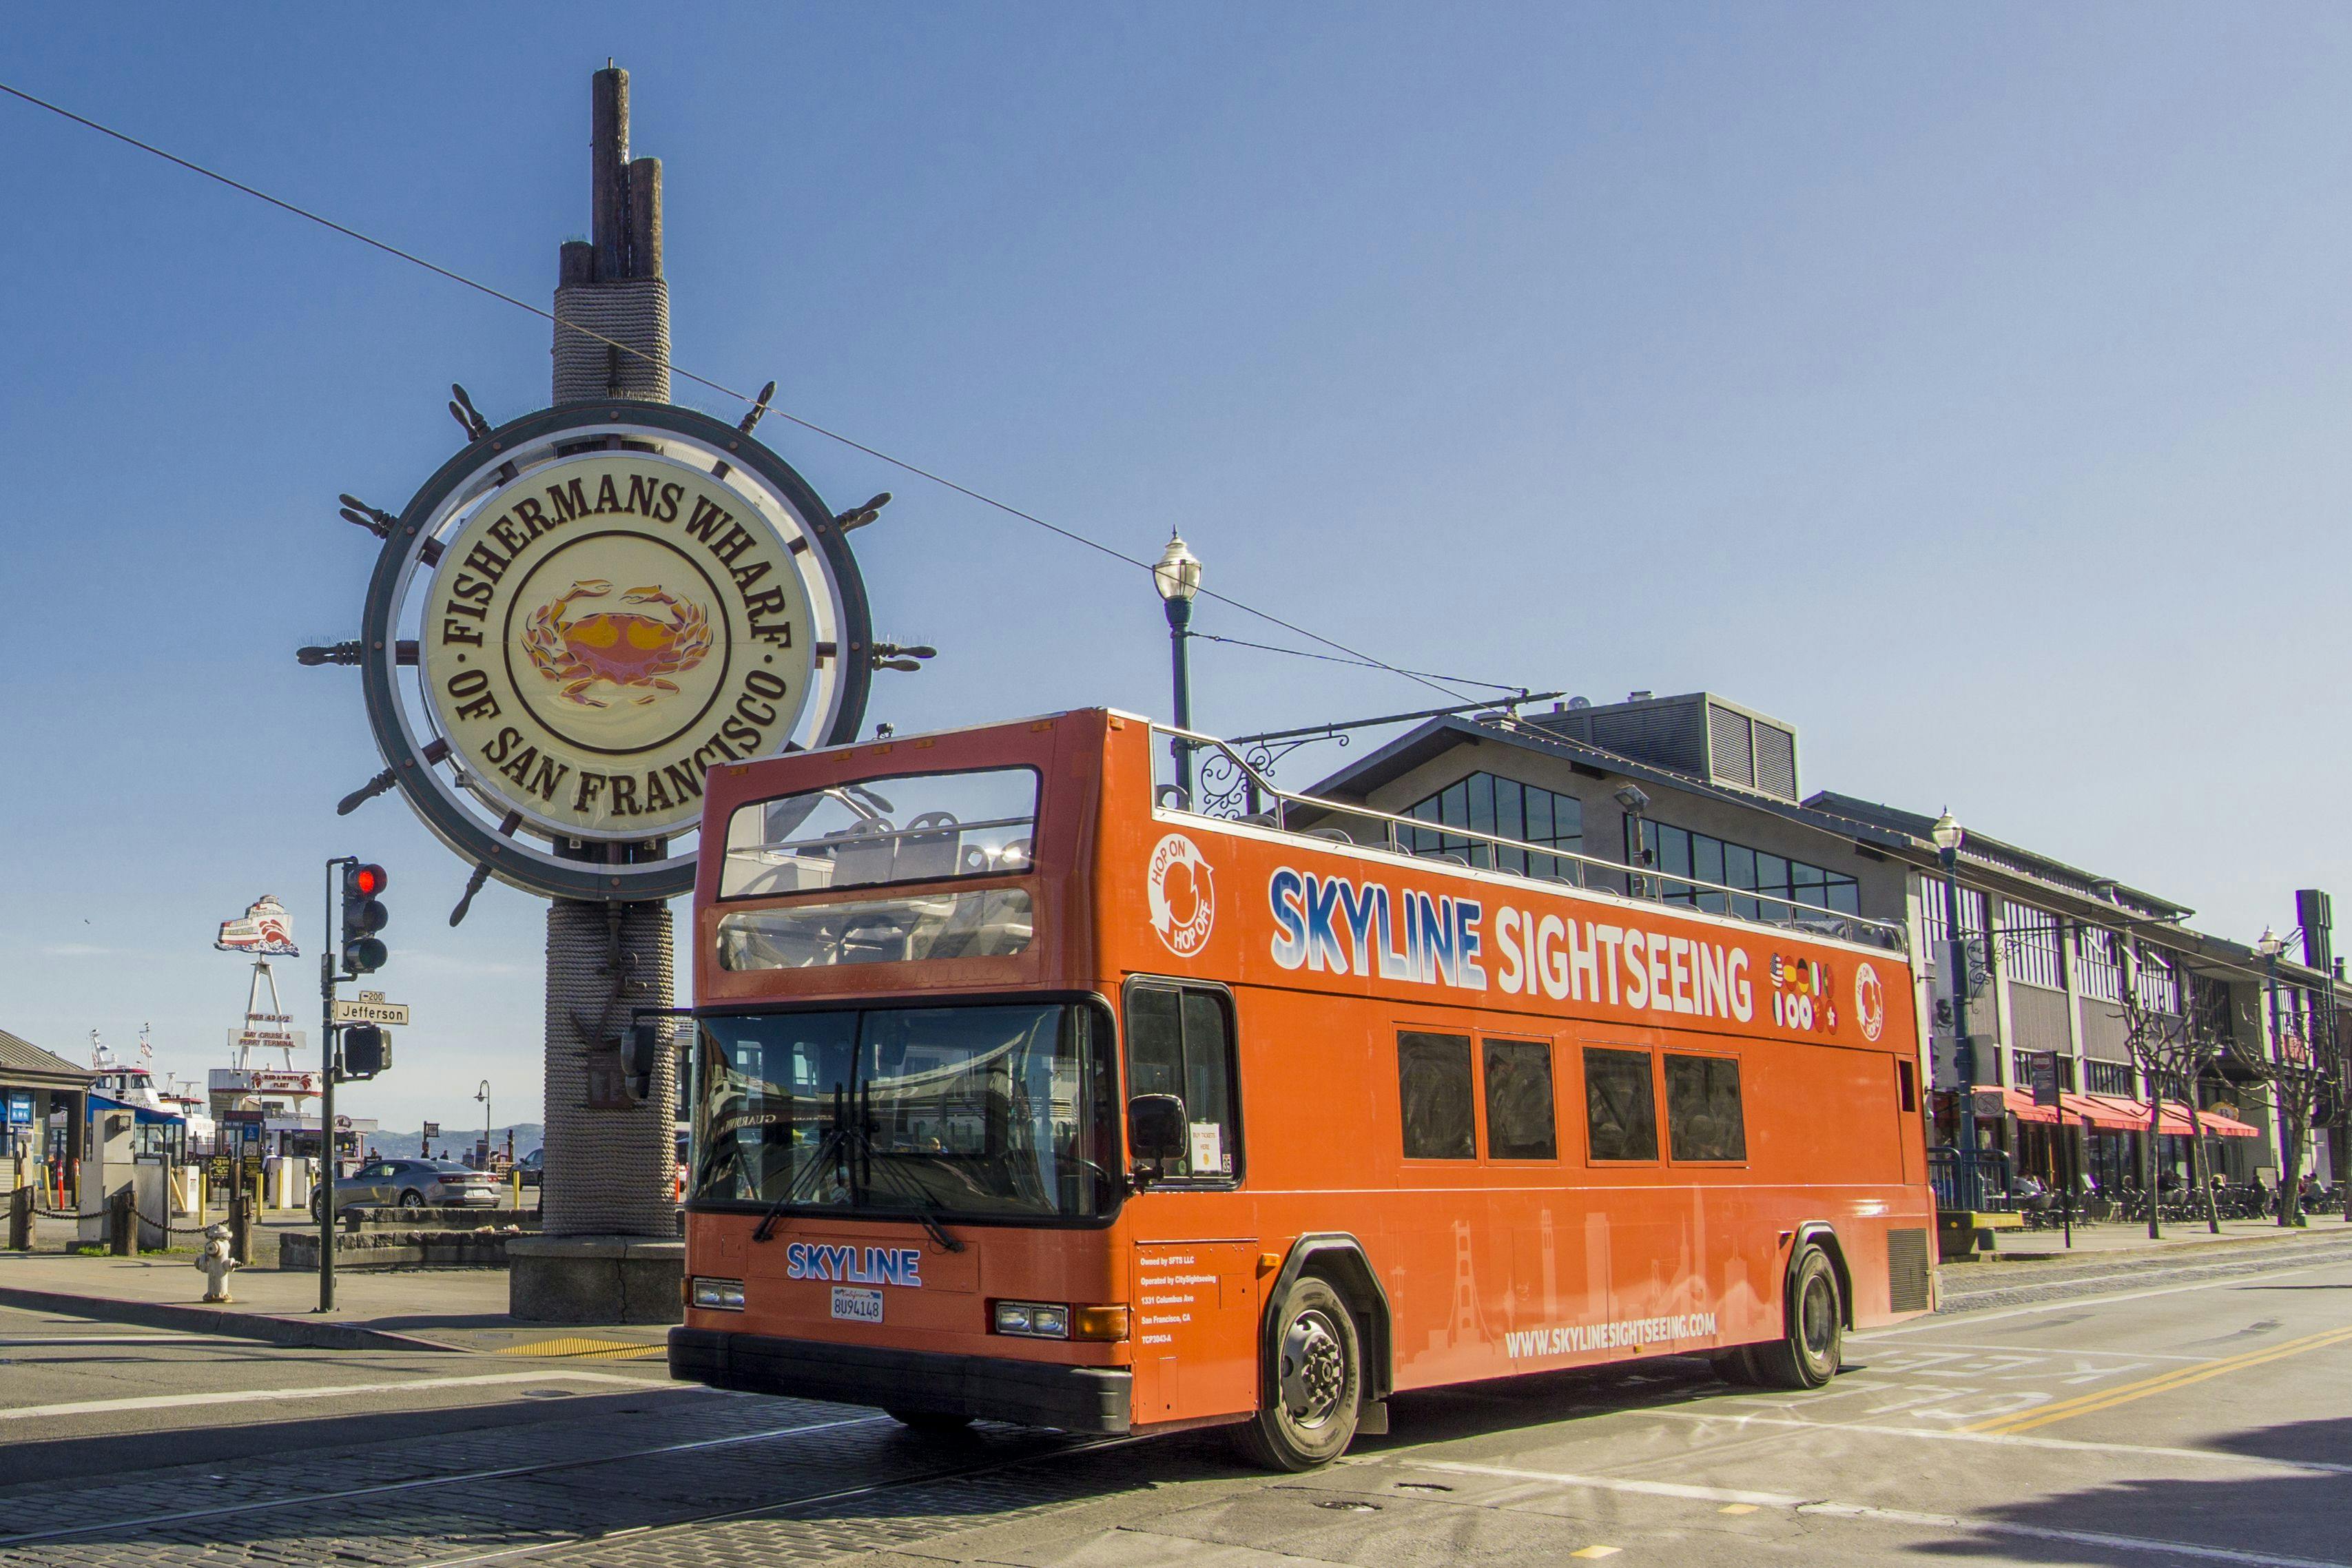 Bay cruise and 24-hour hop-on hop-off bus tour in San Francisco